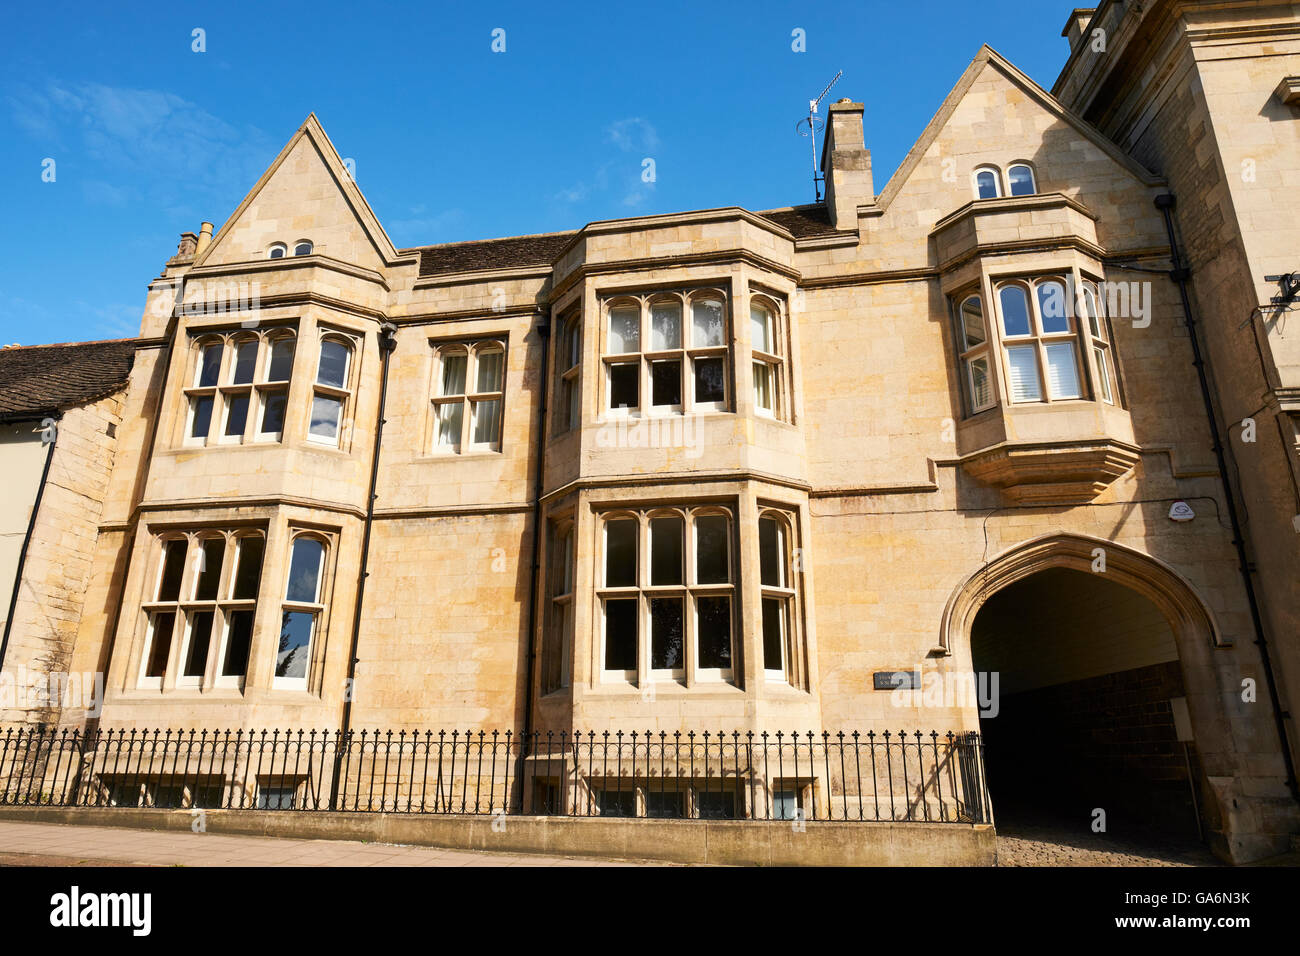 The Old Rectory St Peter's Hill Stamford Lincolnshire UK Stock Photo